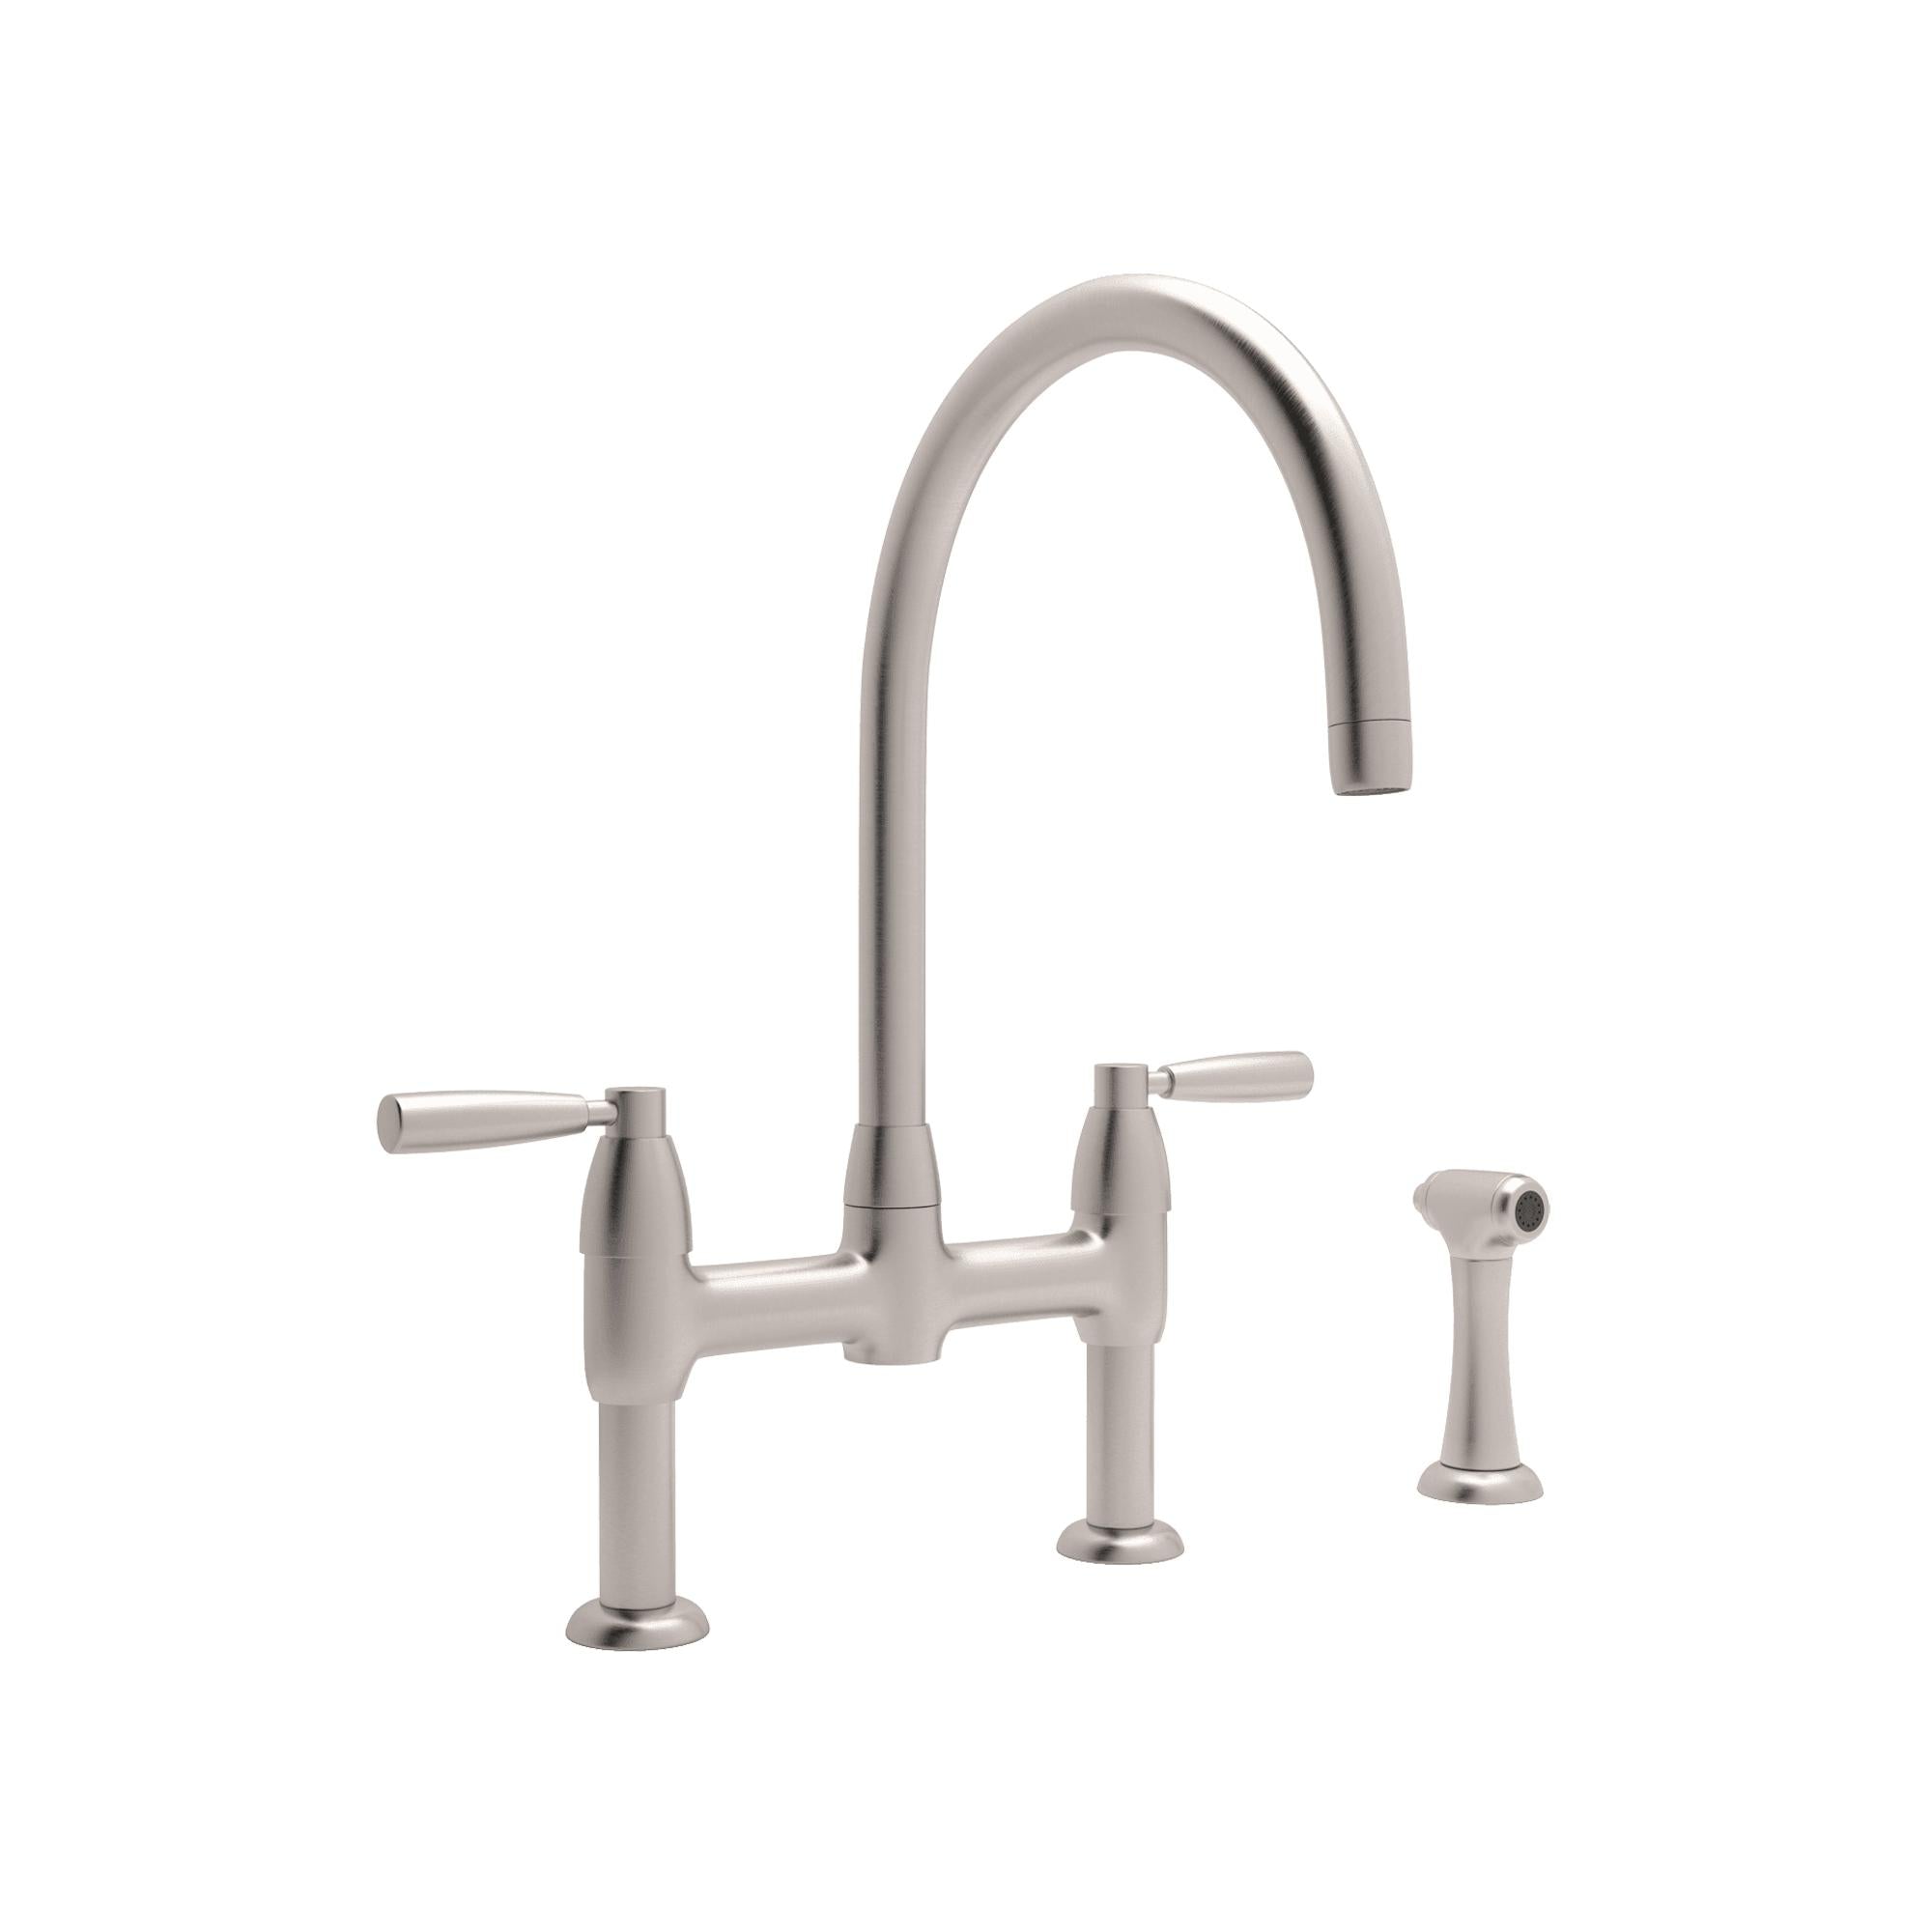 Perrin & Rowe U.4273 Holborn Bridge Kitchen Faucet with C-Spout and Side Spray